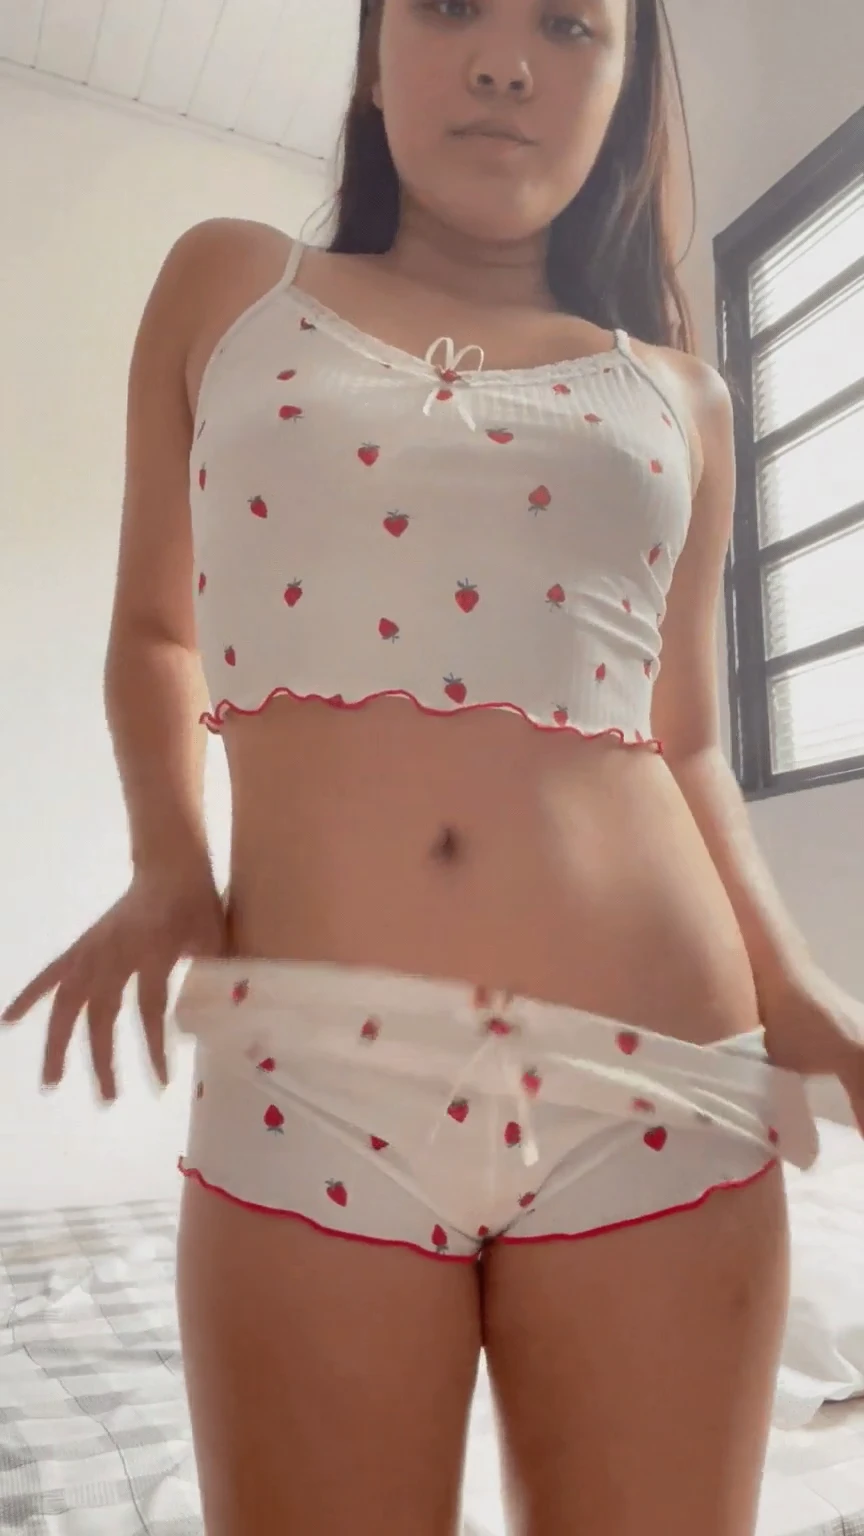 Would BWC creampie a Japanese teen like me?